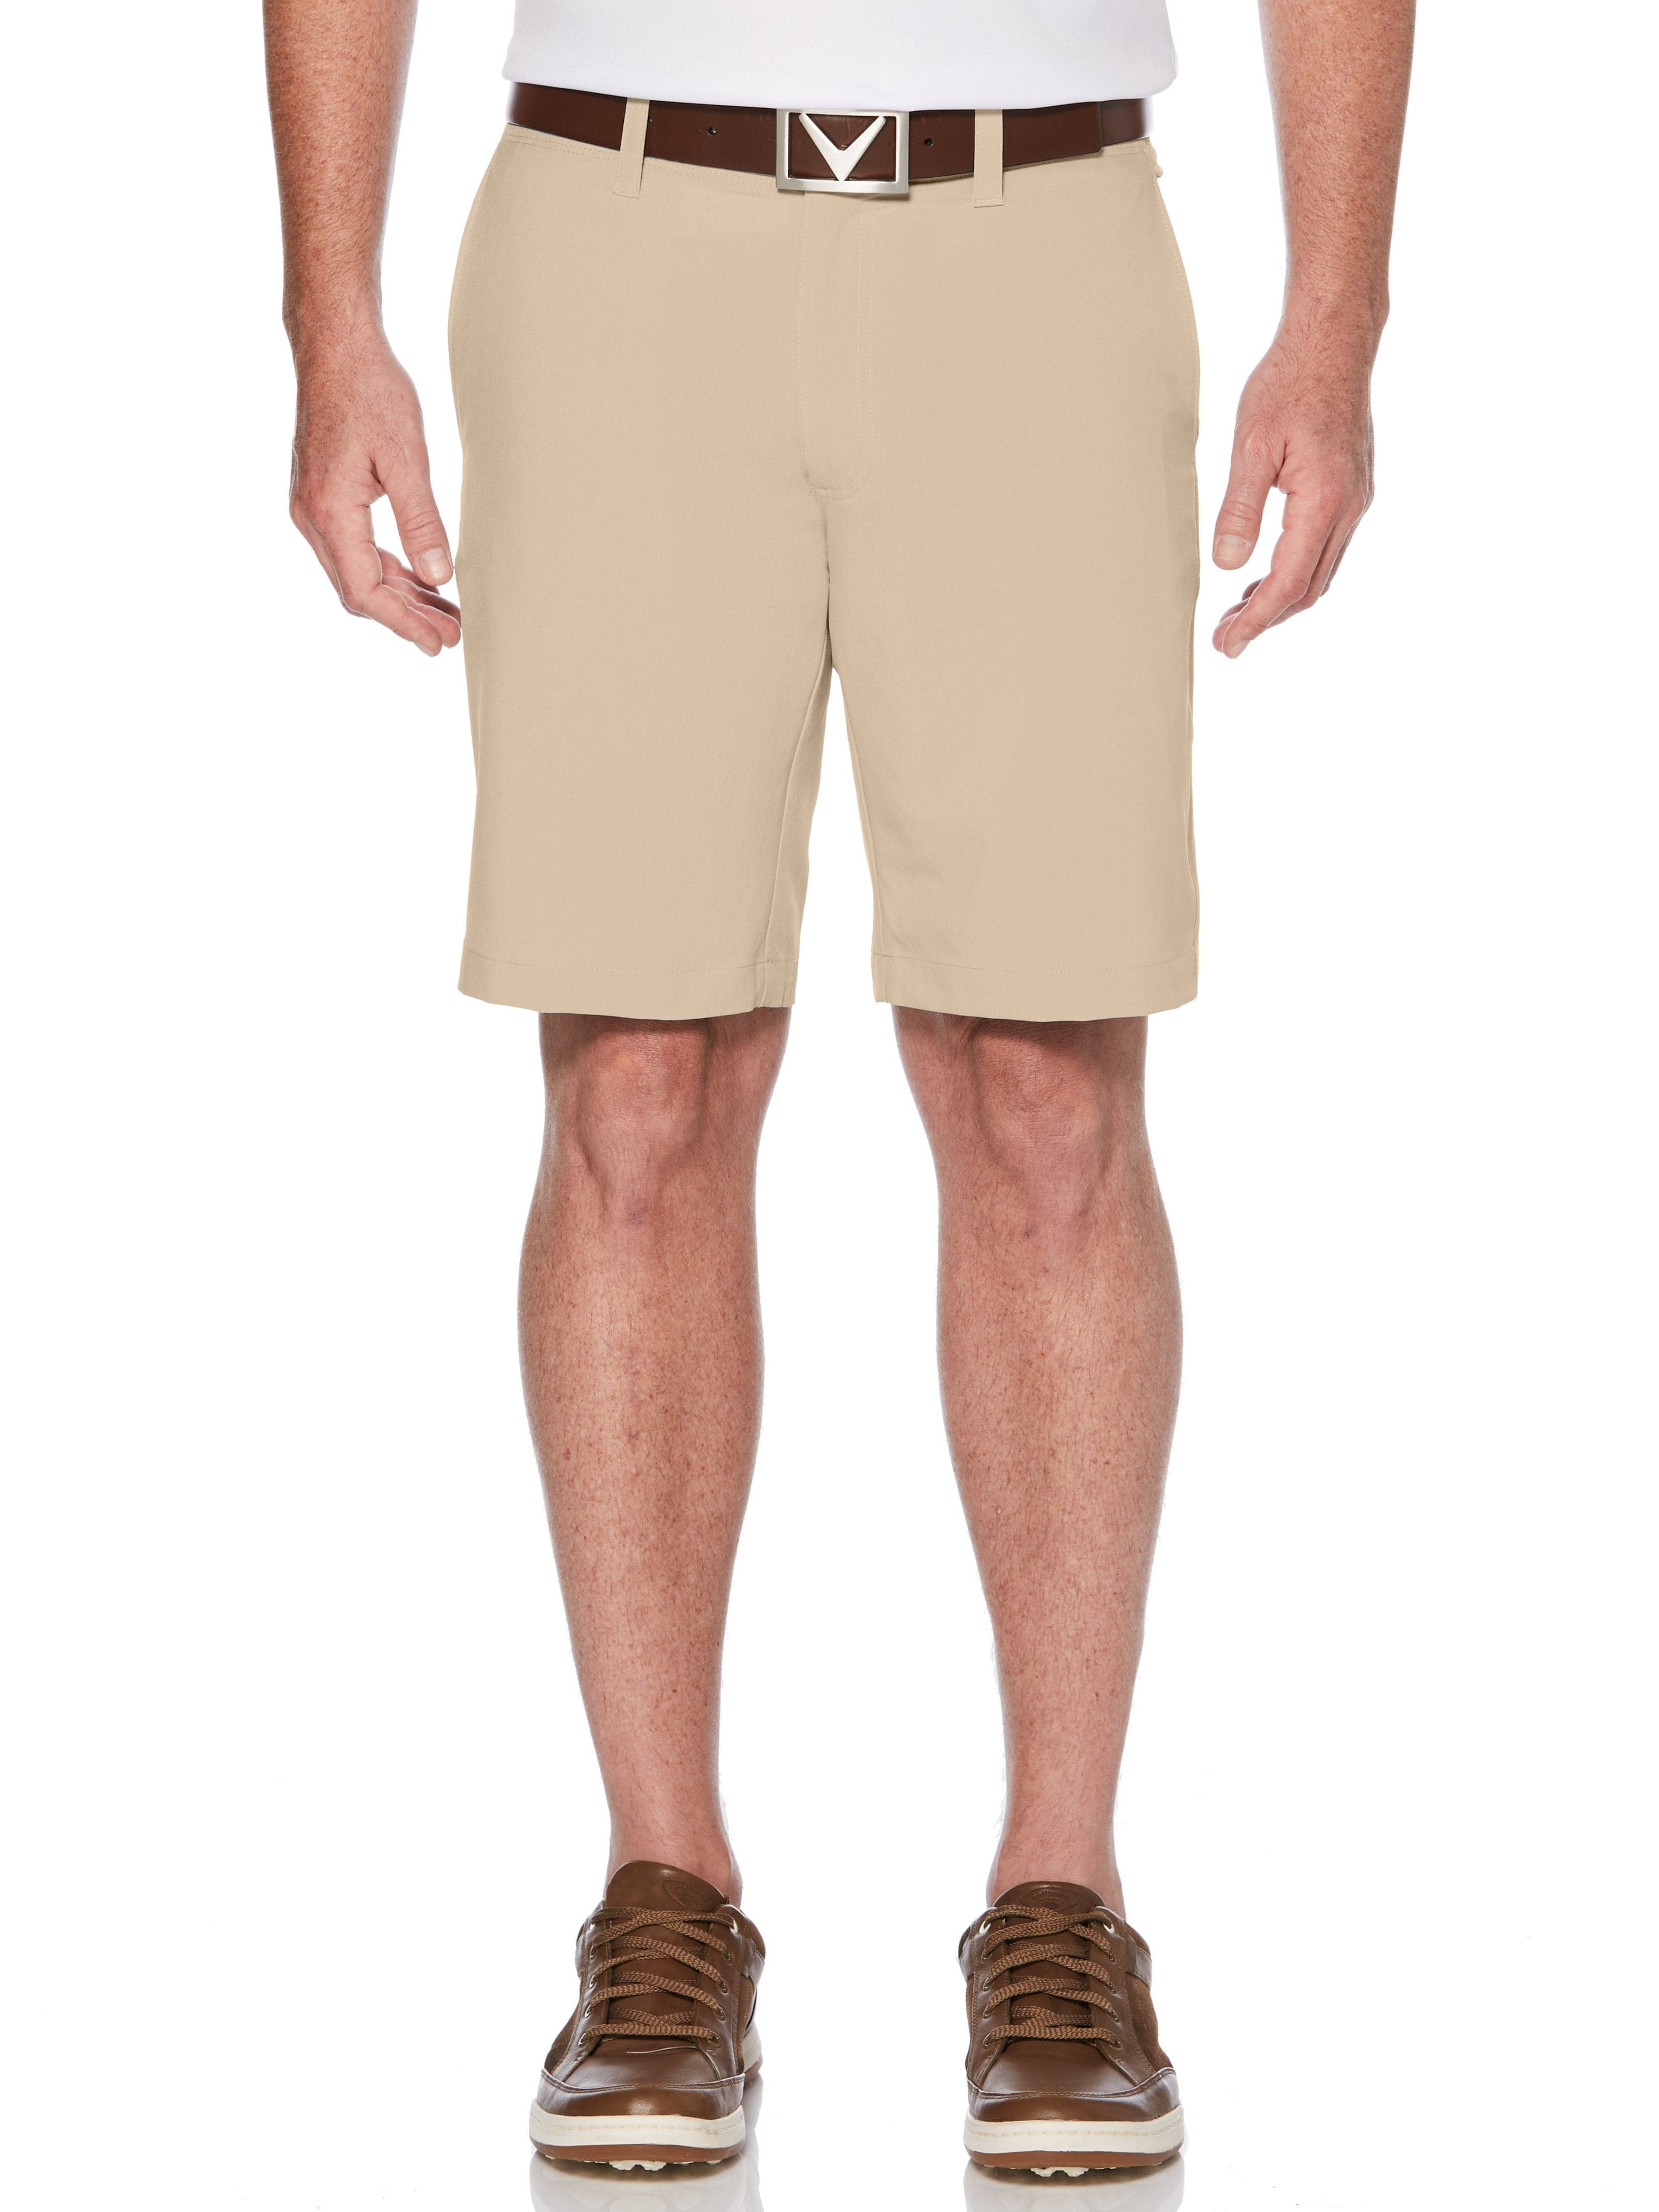 Essentials Mens Golf Stretch Shorts Size 34 Classic Fit Nutmeg Brown  New